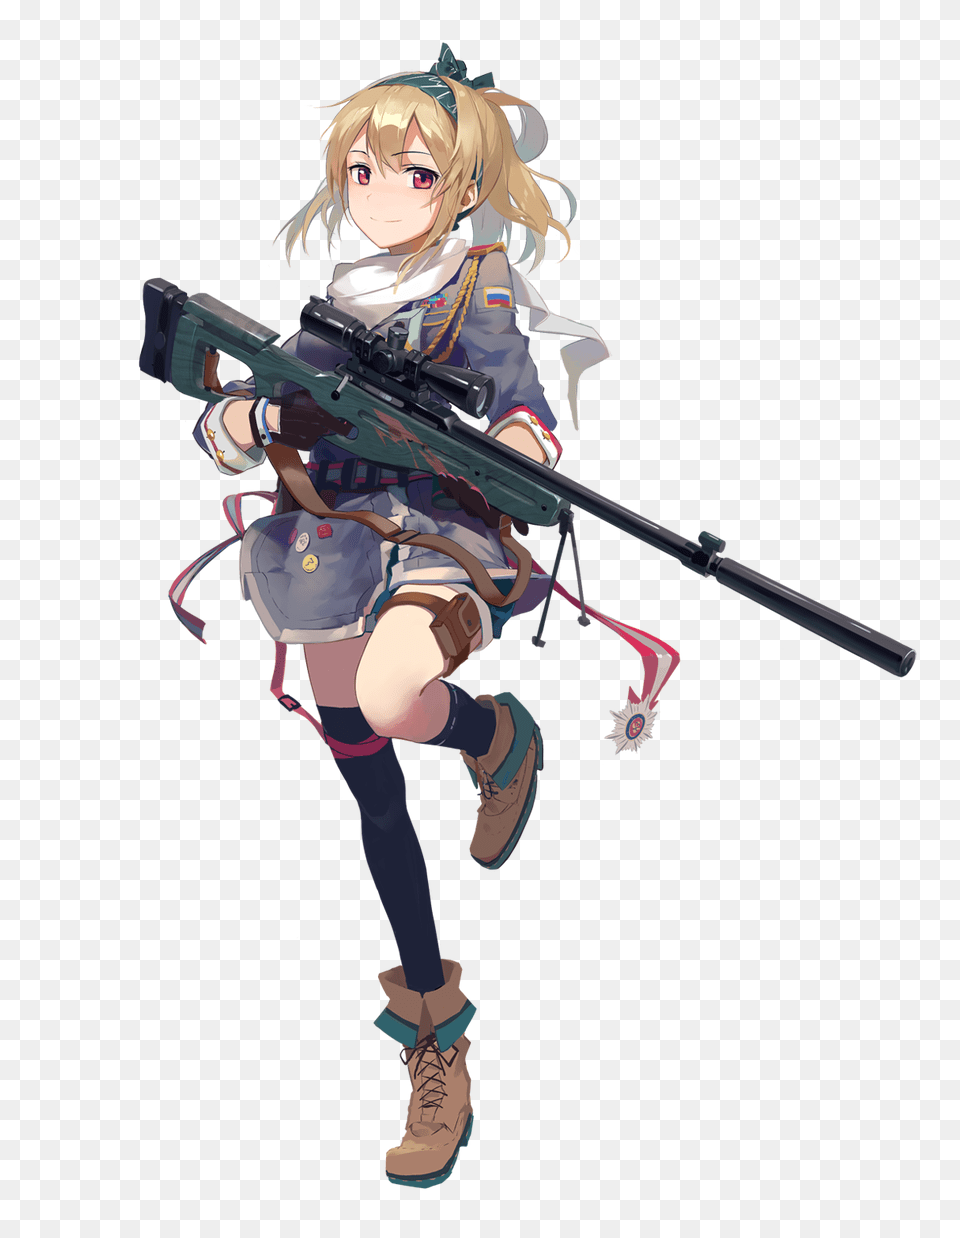 Anime Girl With Gun Glock Drawing Anime Girls Girls Frontline Sv, Weapon, Rifle, Publication, Firearm Free Png Download